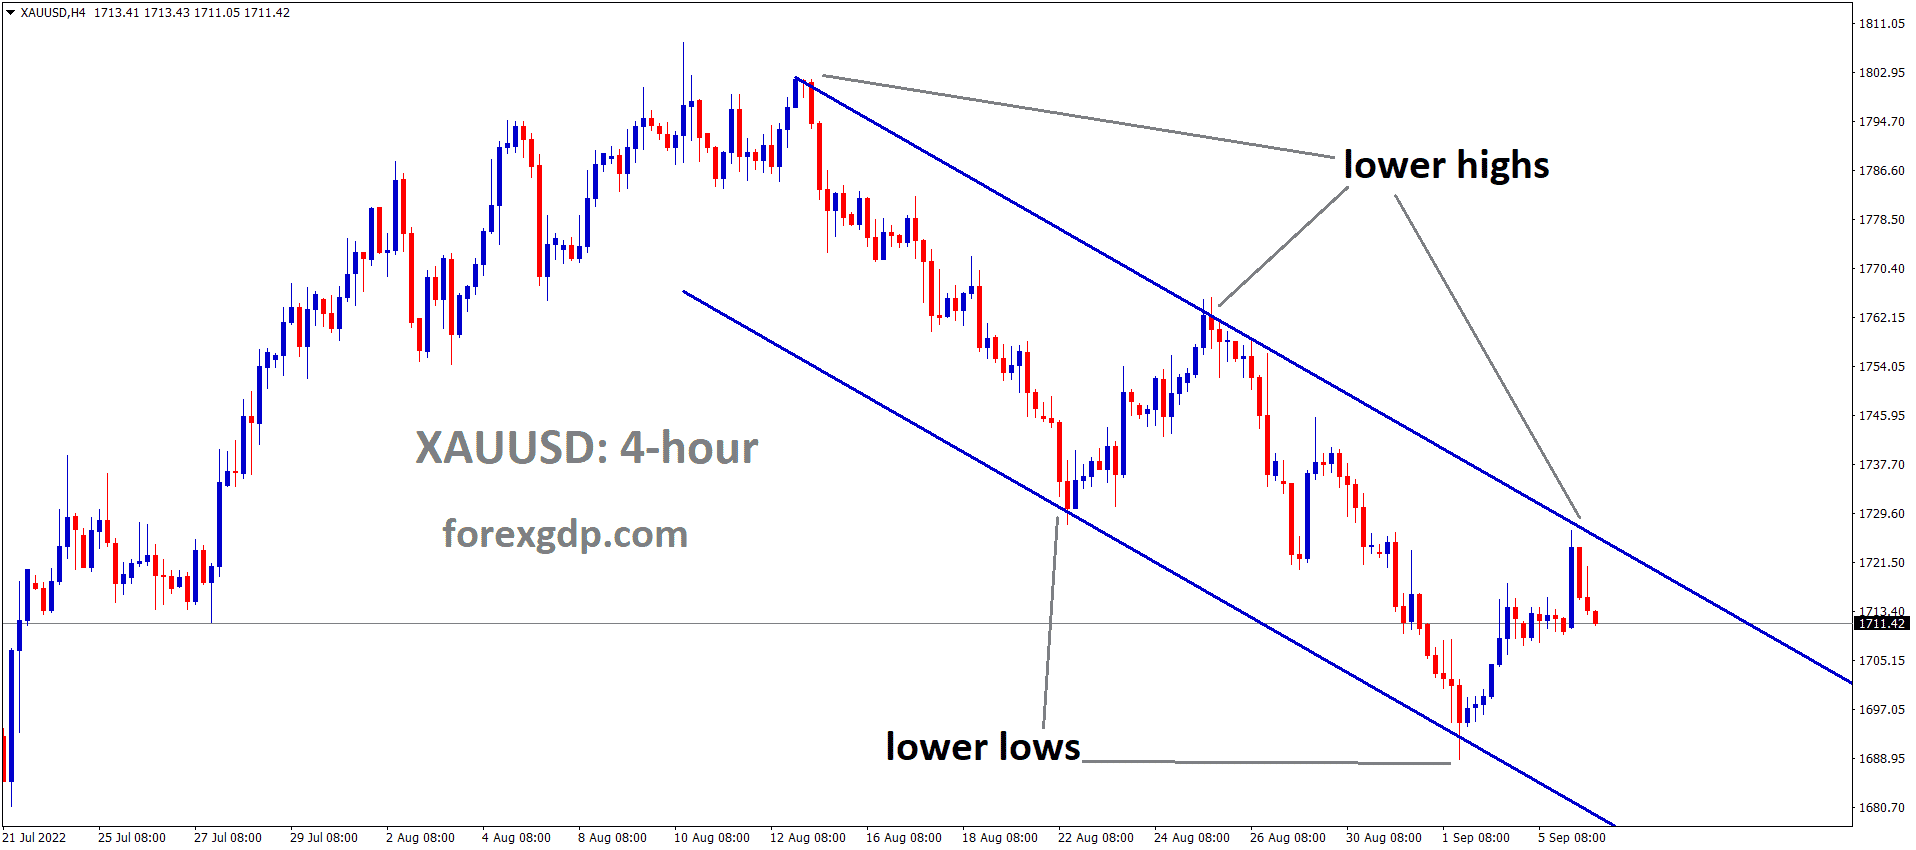 XAUUSD Gold price is moving in the Descending channel and the market has fallen from the lower high area of the channel 1